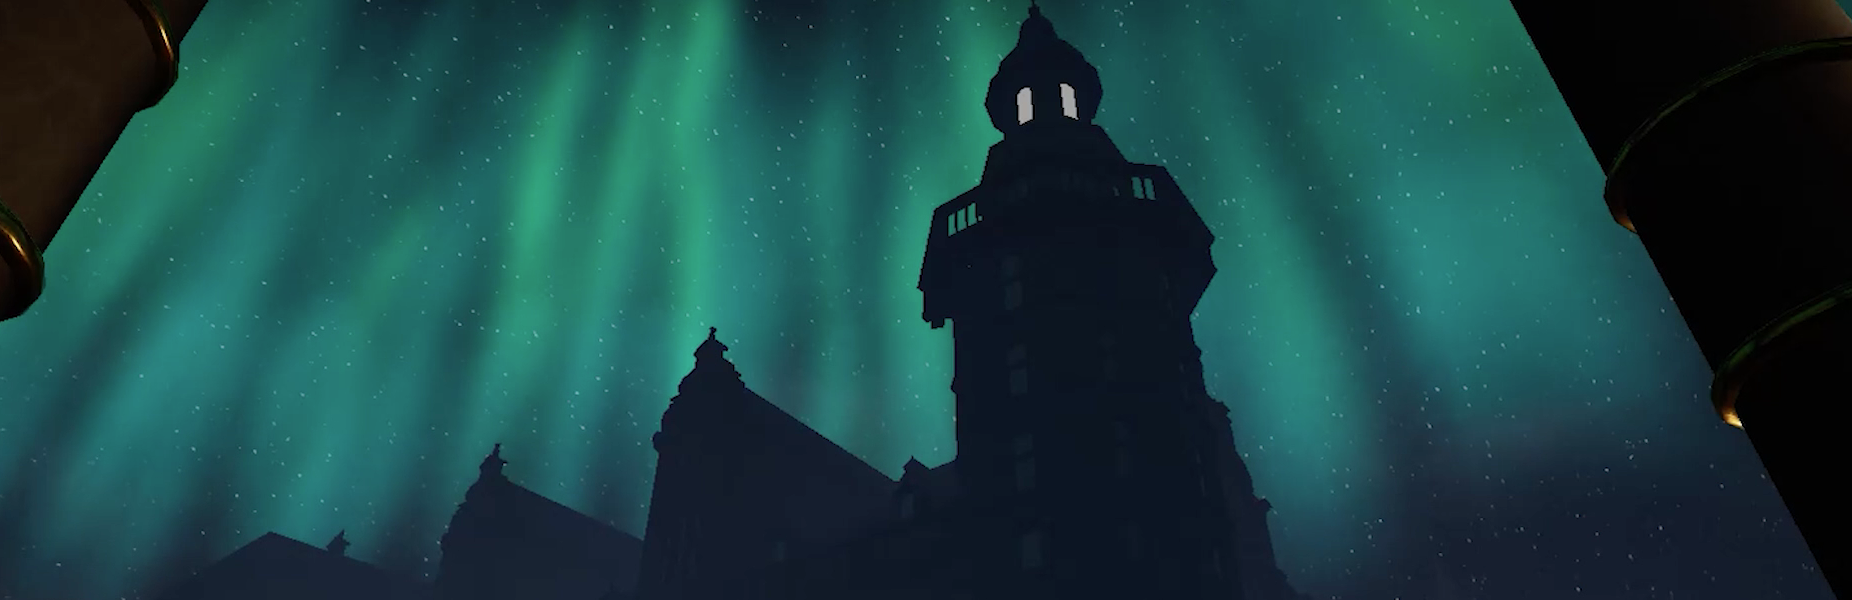 A castle in shadow stands in front of green northern lights in Denmark